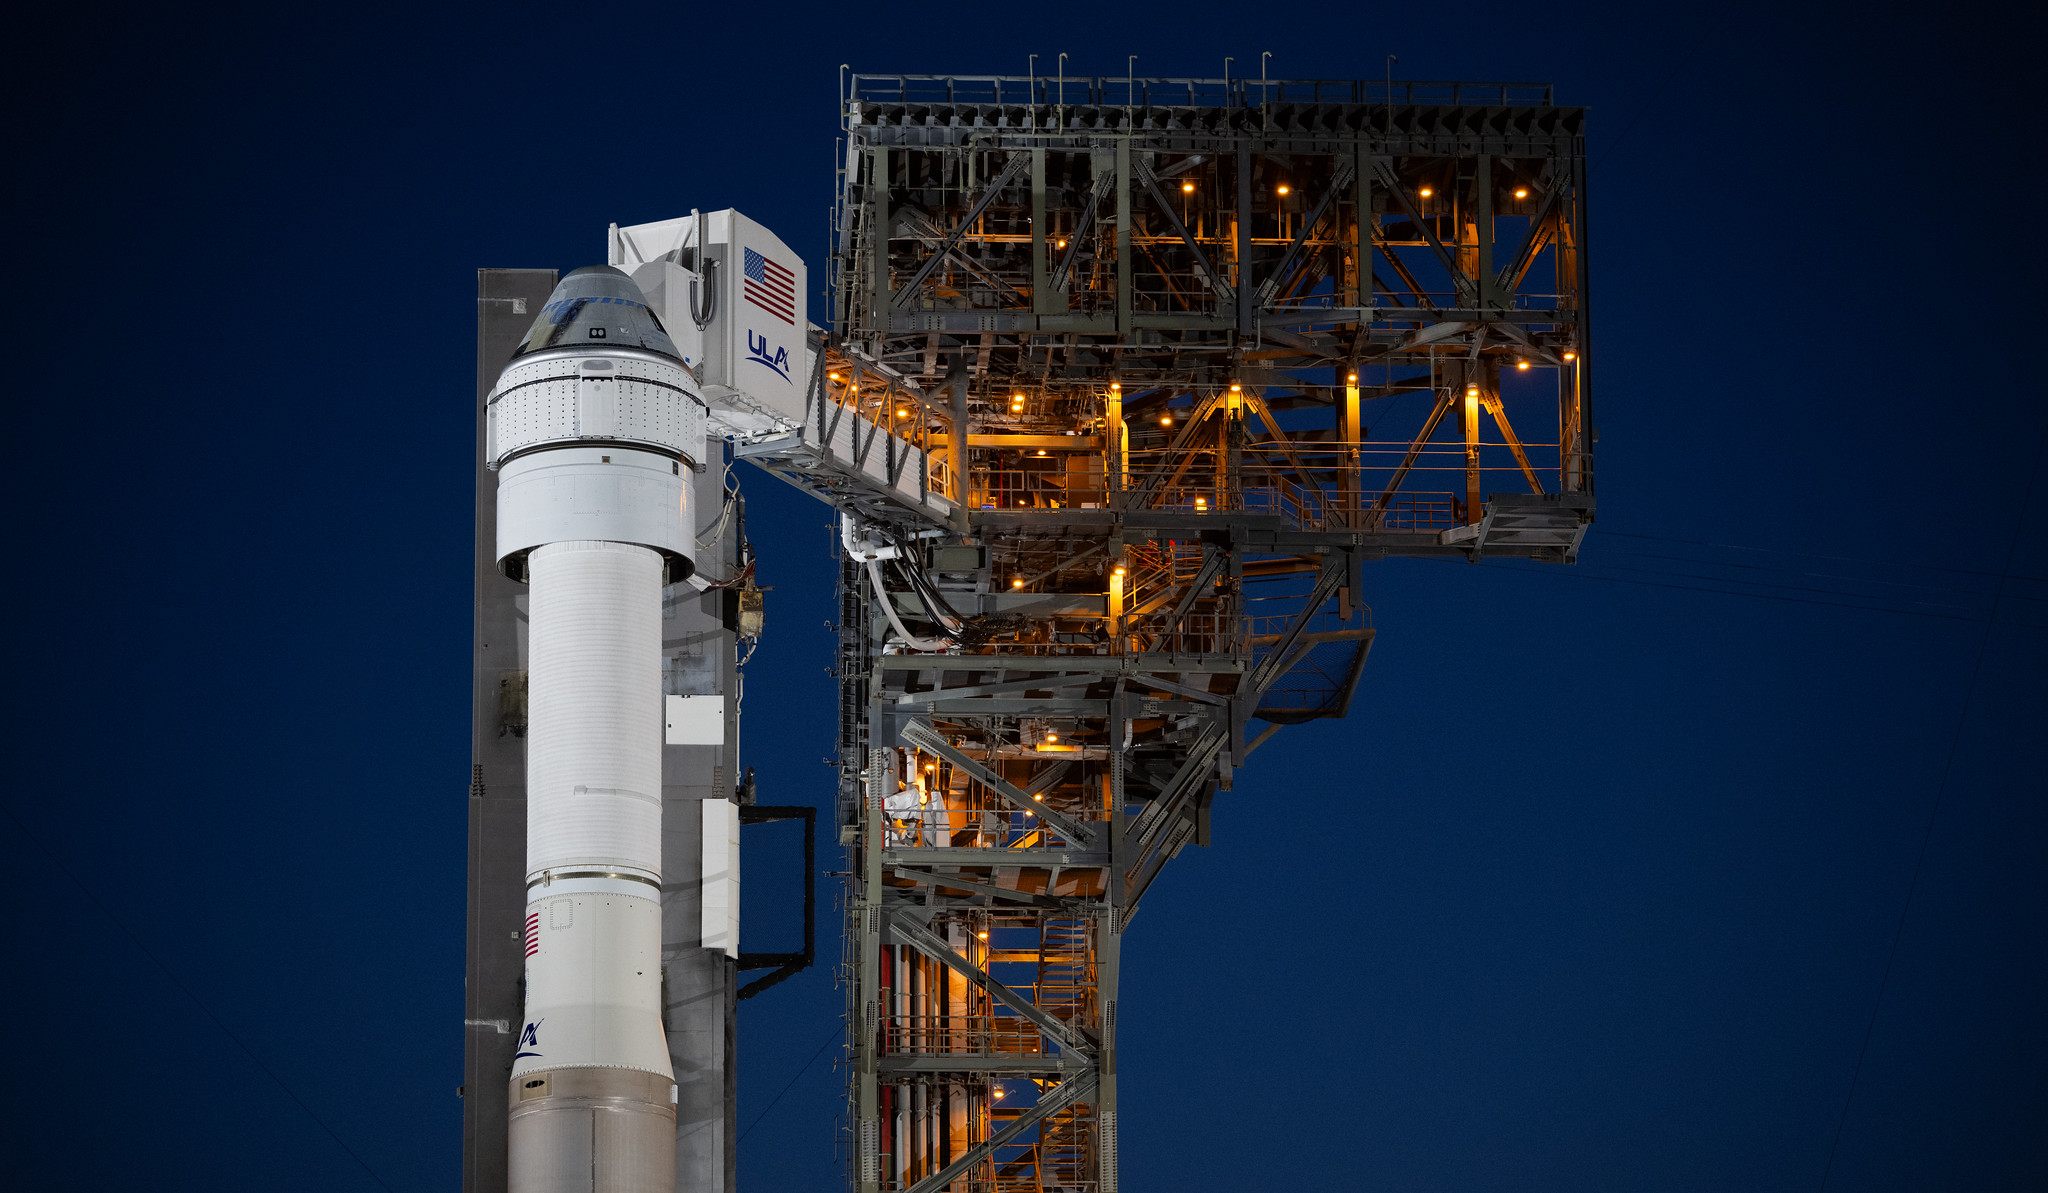 A United Launch Alliance Atlas V rocket with Boeing’s CST-100 Starliner spacecraft aboard is seen illuminated by spotlights on the launch pad at Space Launch Complex 41 ahead of the NASA’s Boeing Crew Flight Test, Saturday, May 4, 2024 at Cape Canaveral Space Force Station in Florida.